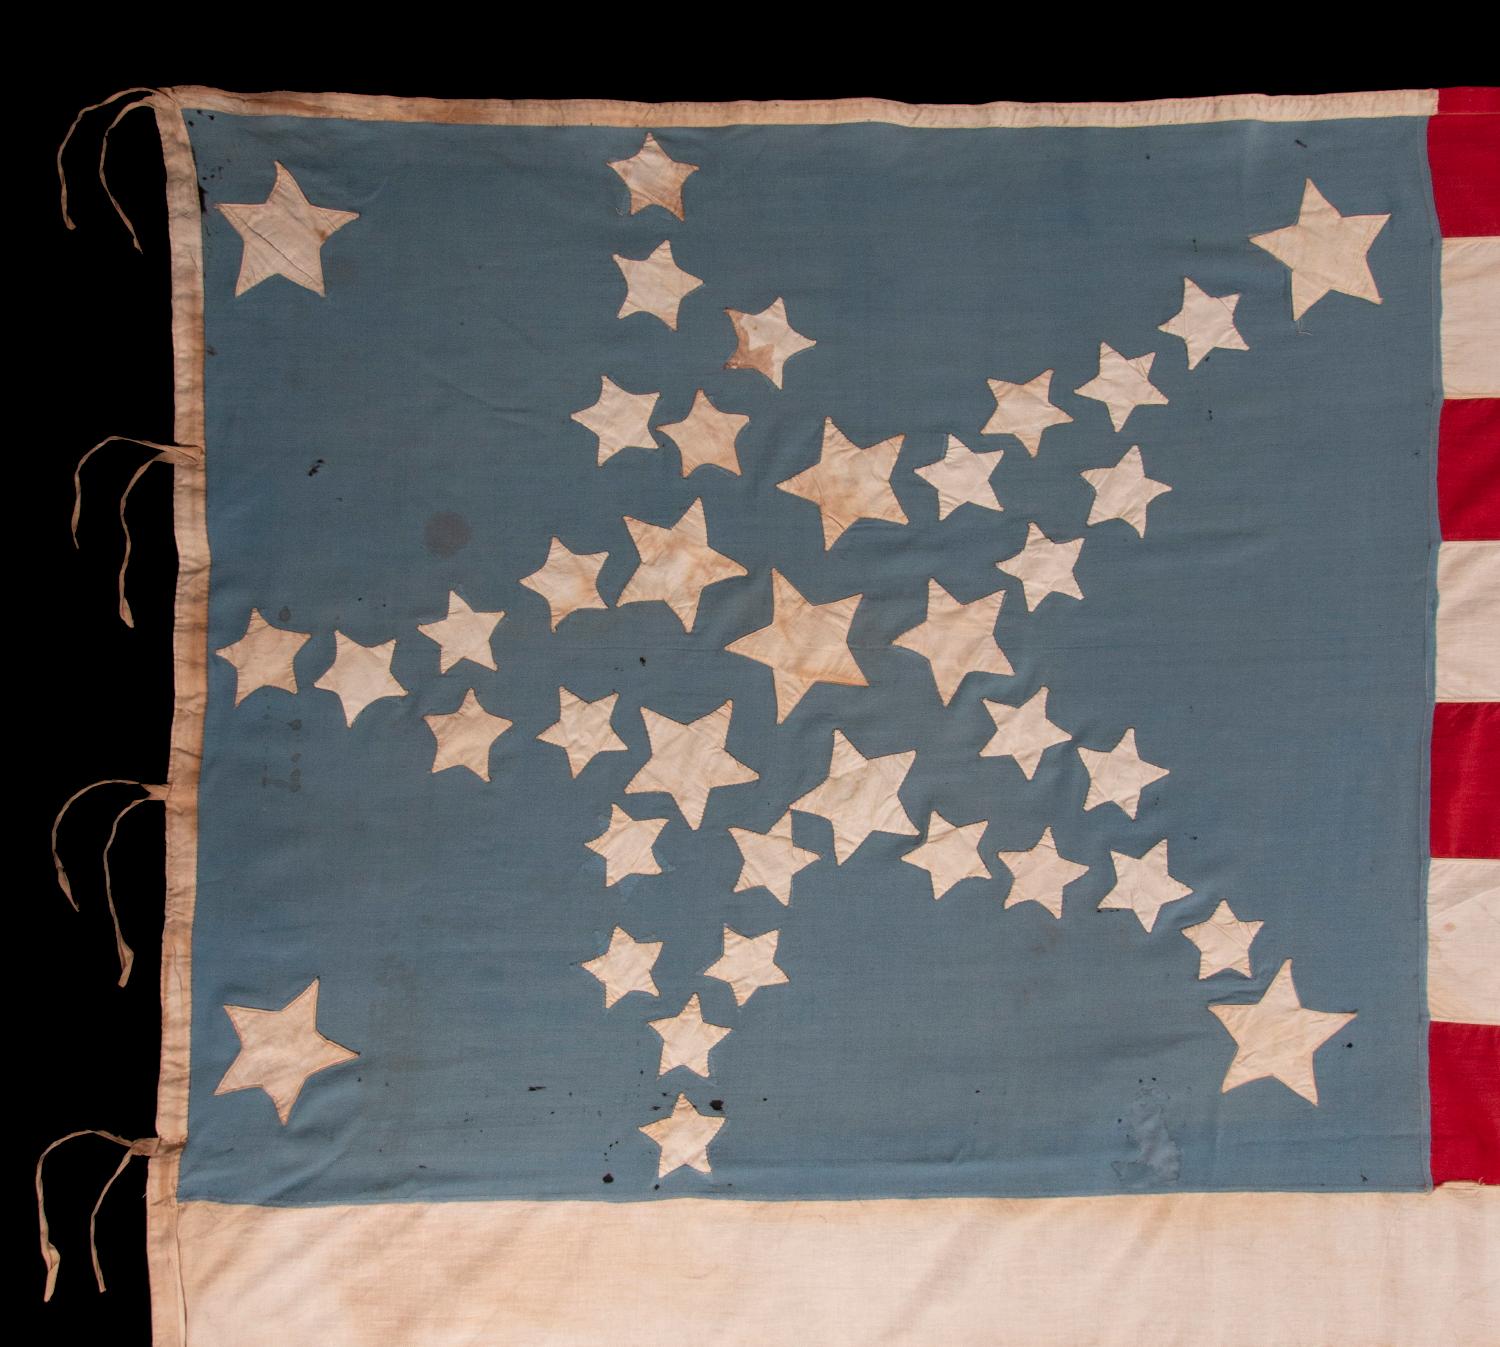 34 STARS IN A WHIMSICAL RENDITION OF THE GREAT STAR PATTERN, ON A CIVIL WAR PERIOD FLAG WITH A CORNFLOWER BLUE CANTON, UPDATED TO 39 STARS IN 1876

34 star American national flag with additional stars added and one of the most stunning graphic